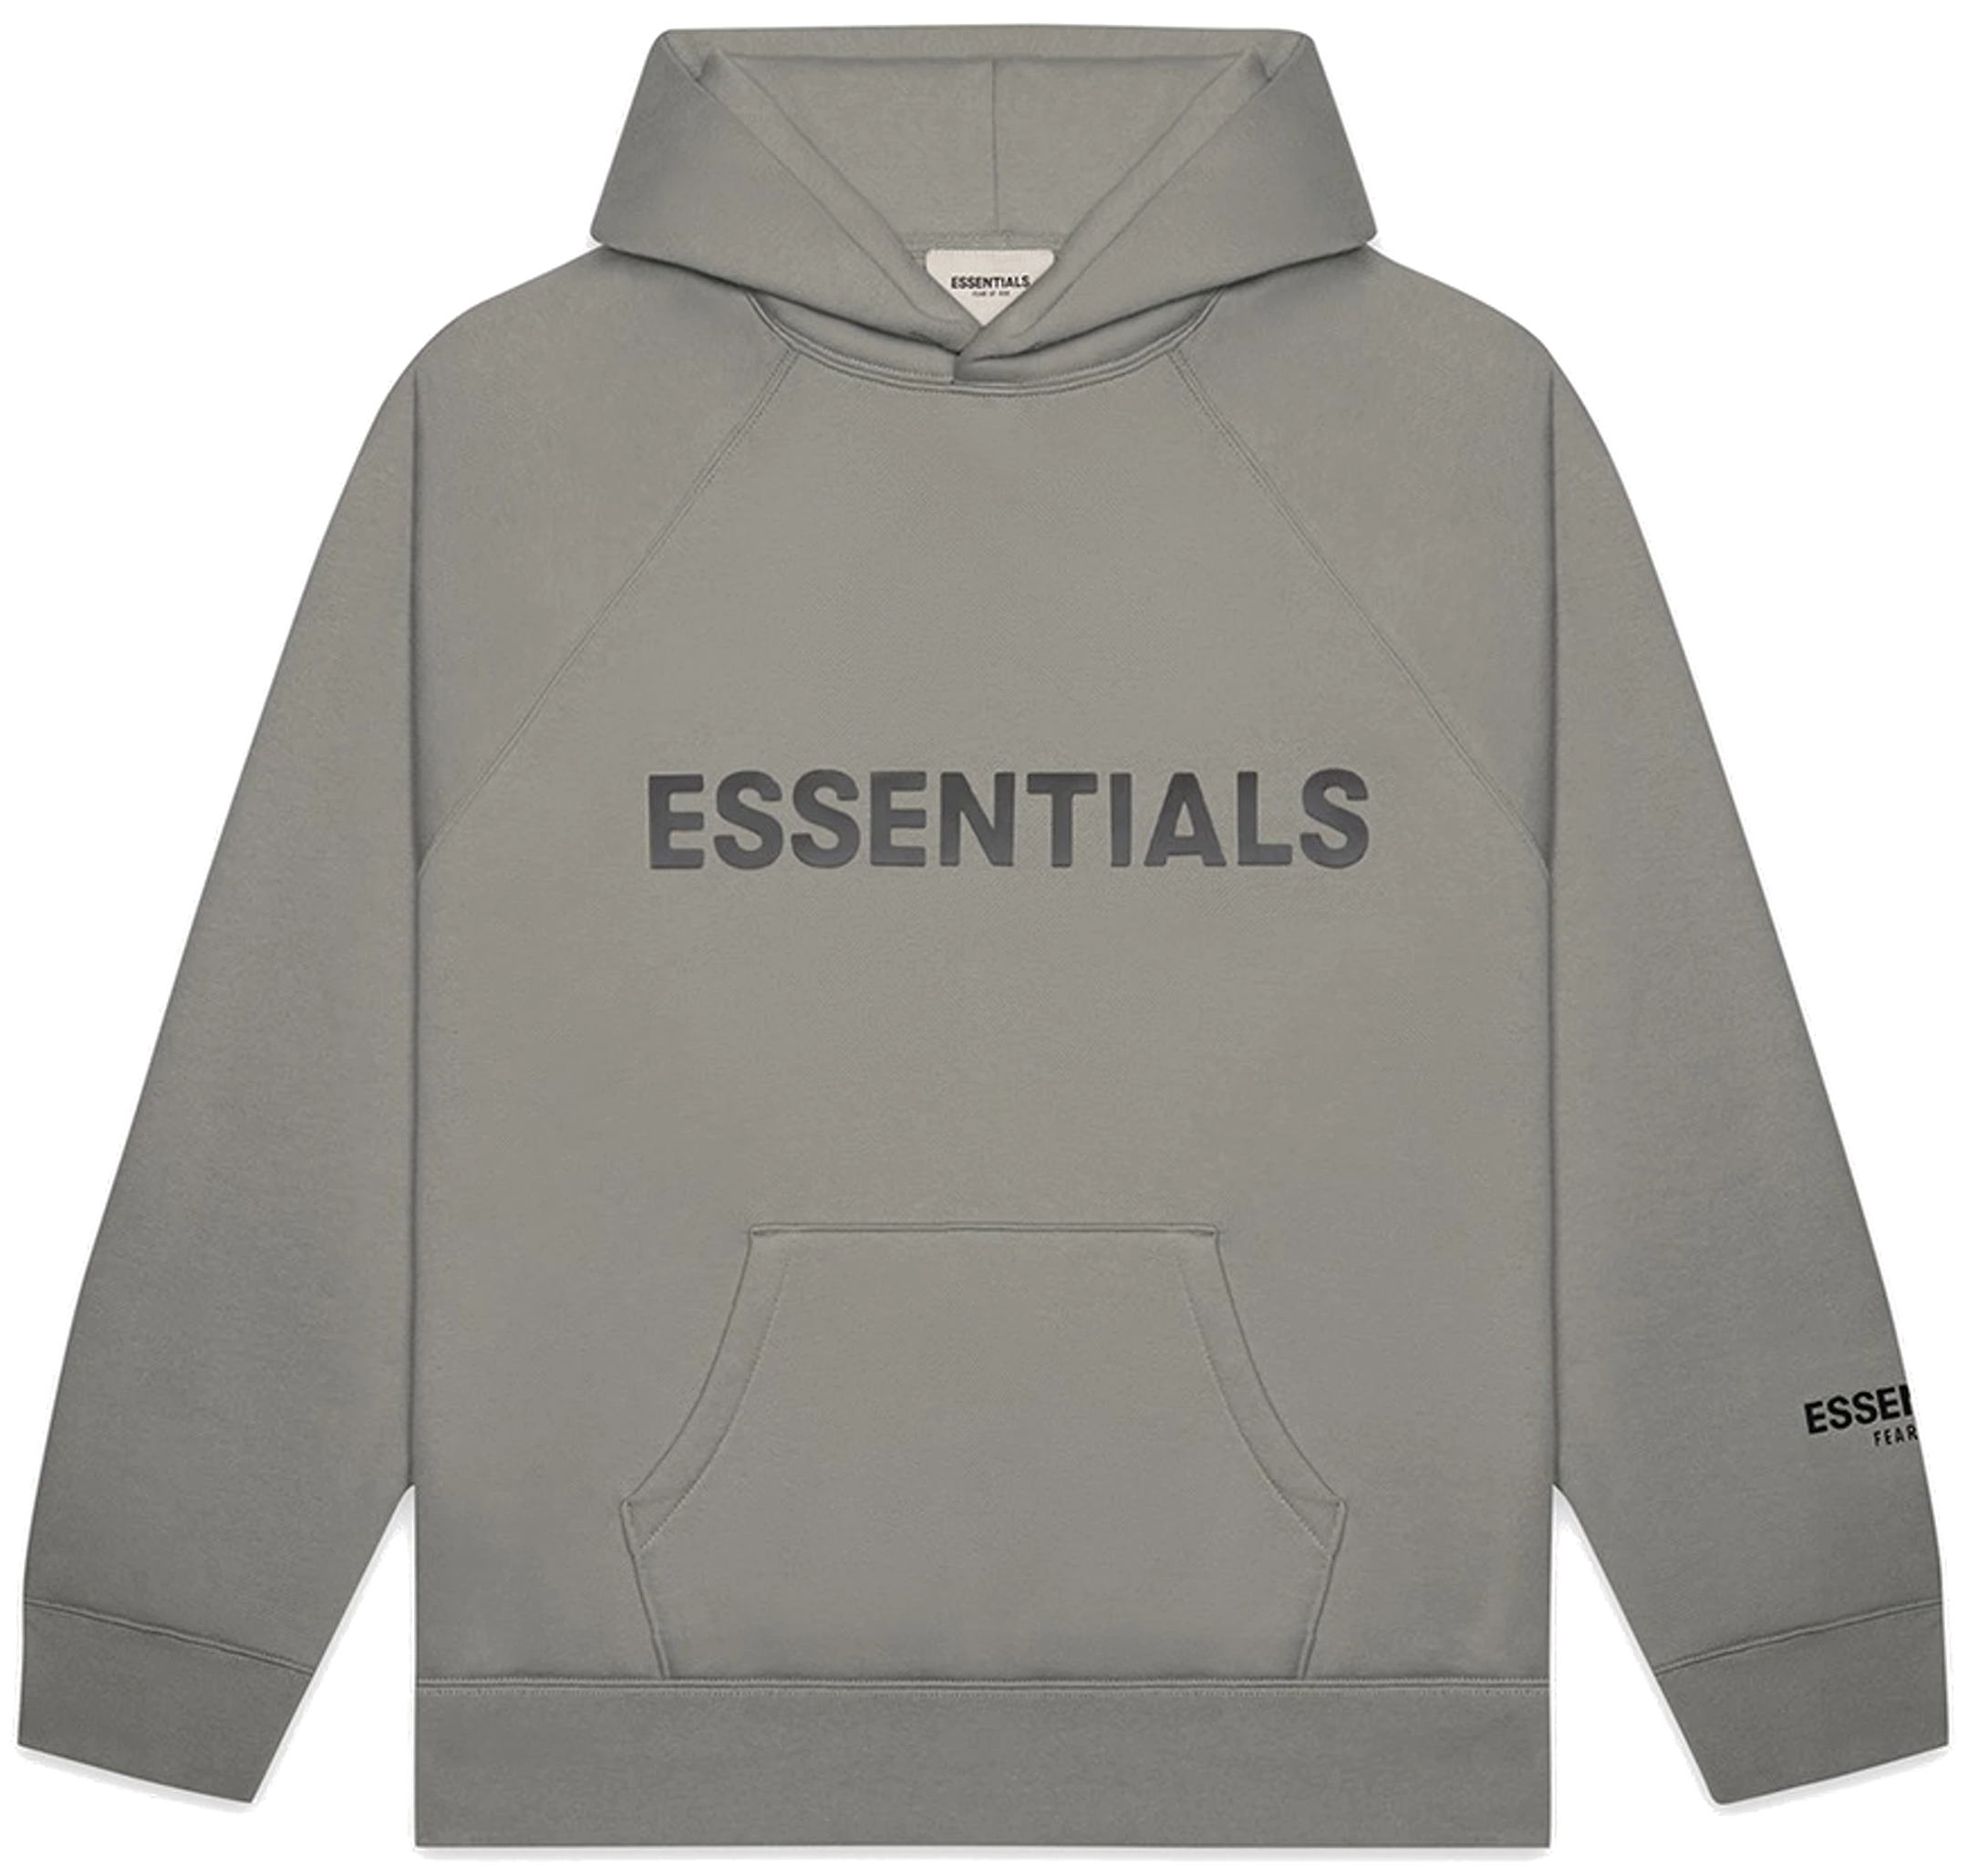 FEAR OF GOD Essentials hoodie charcoal – Royal Culture